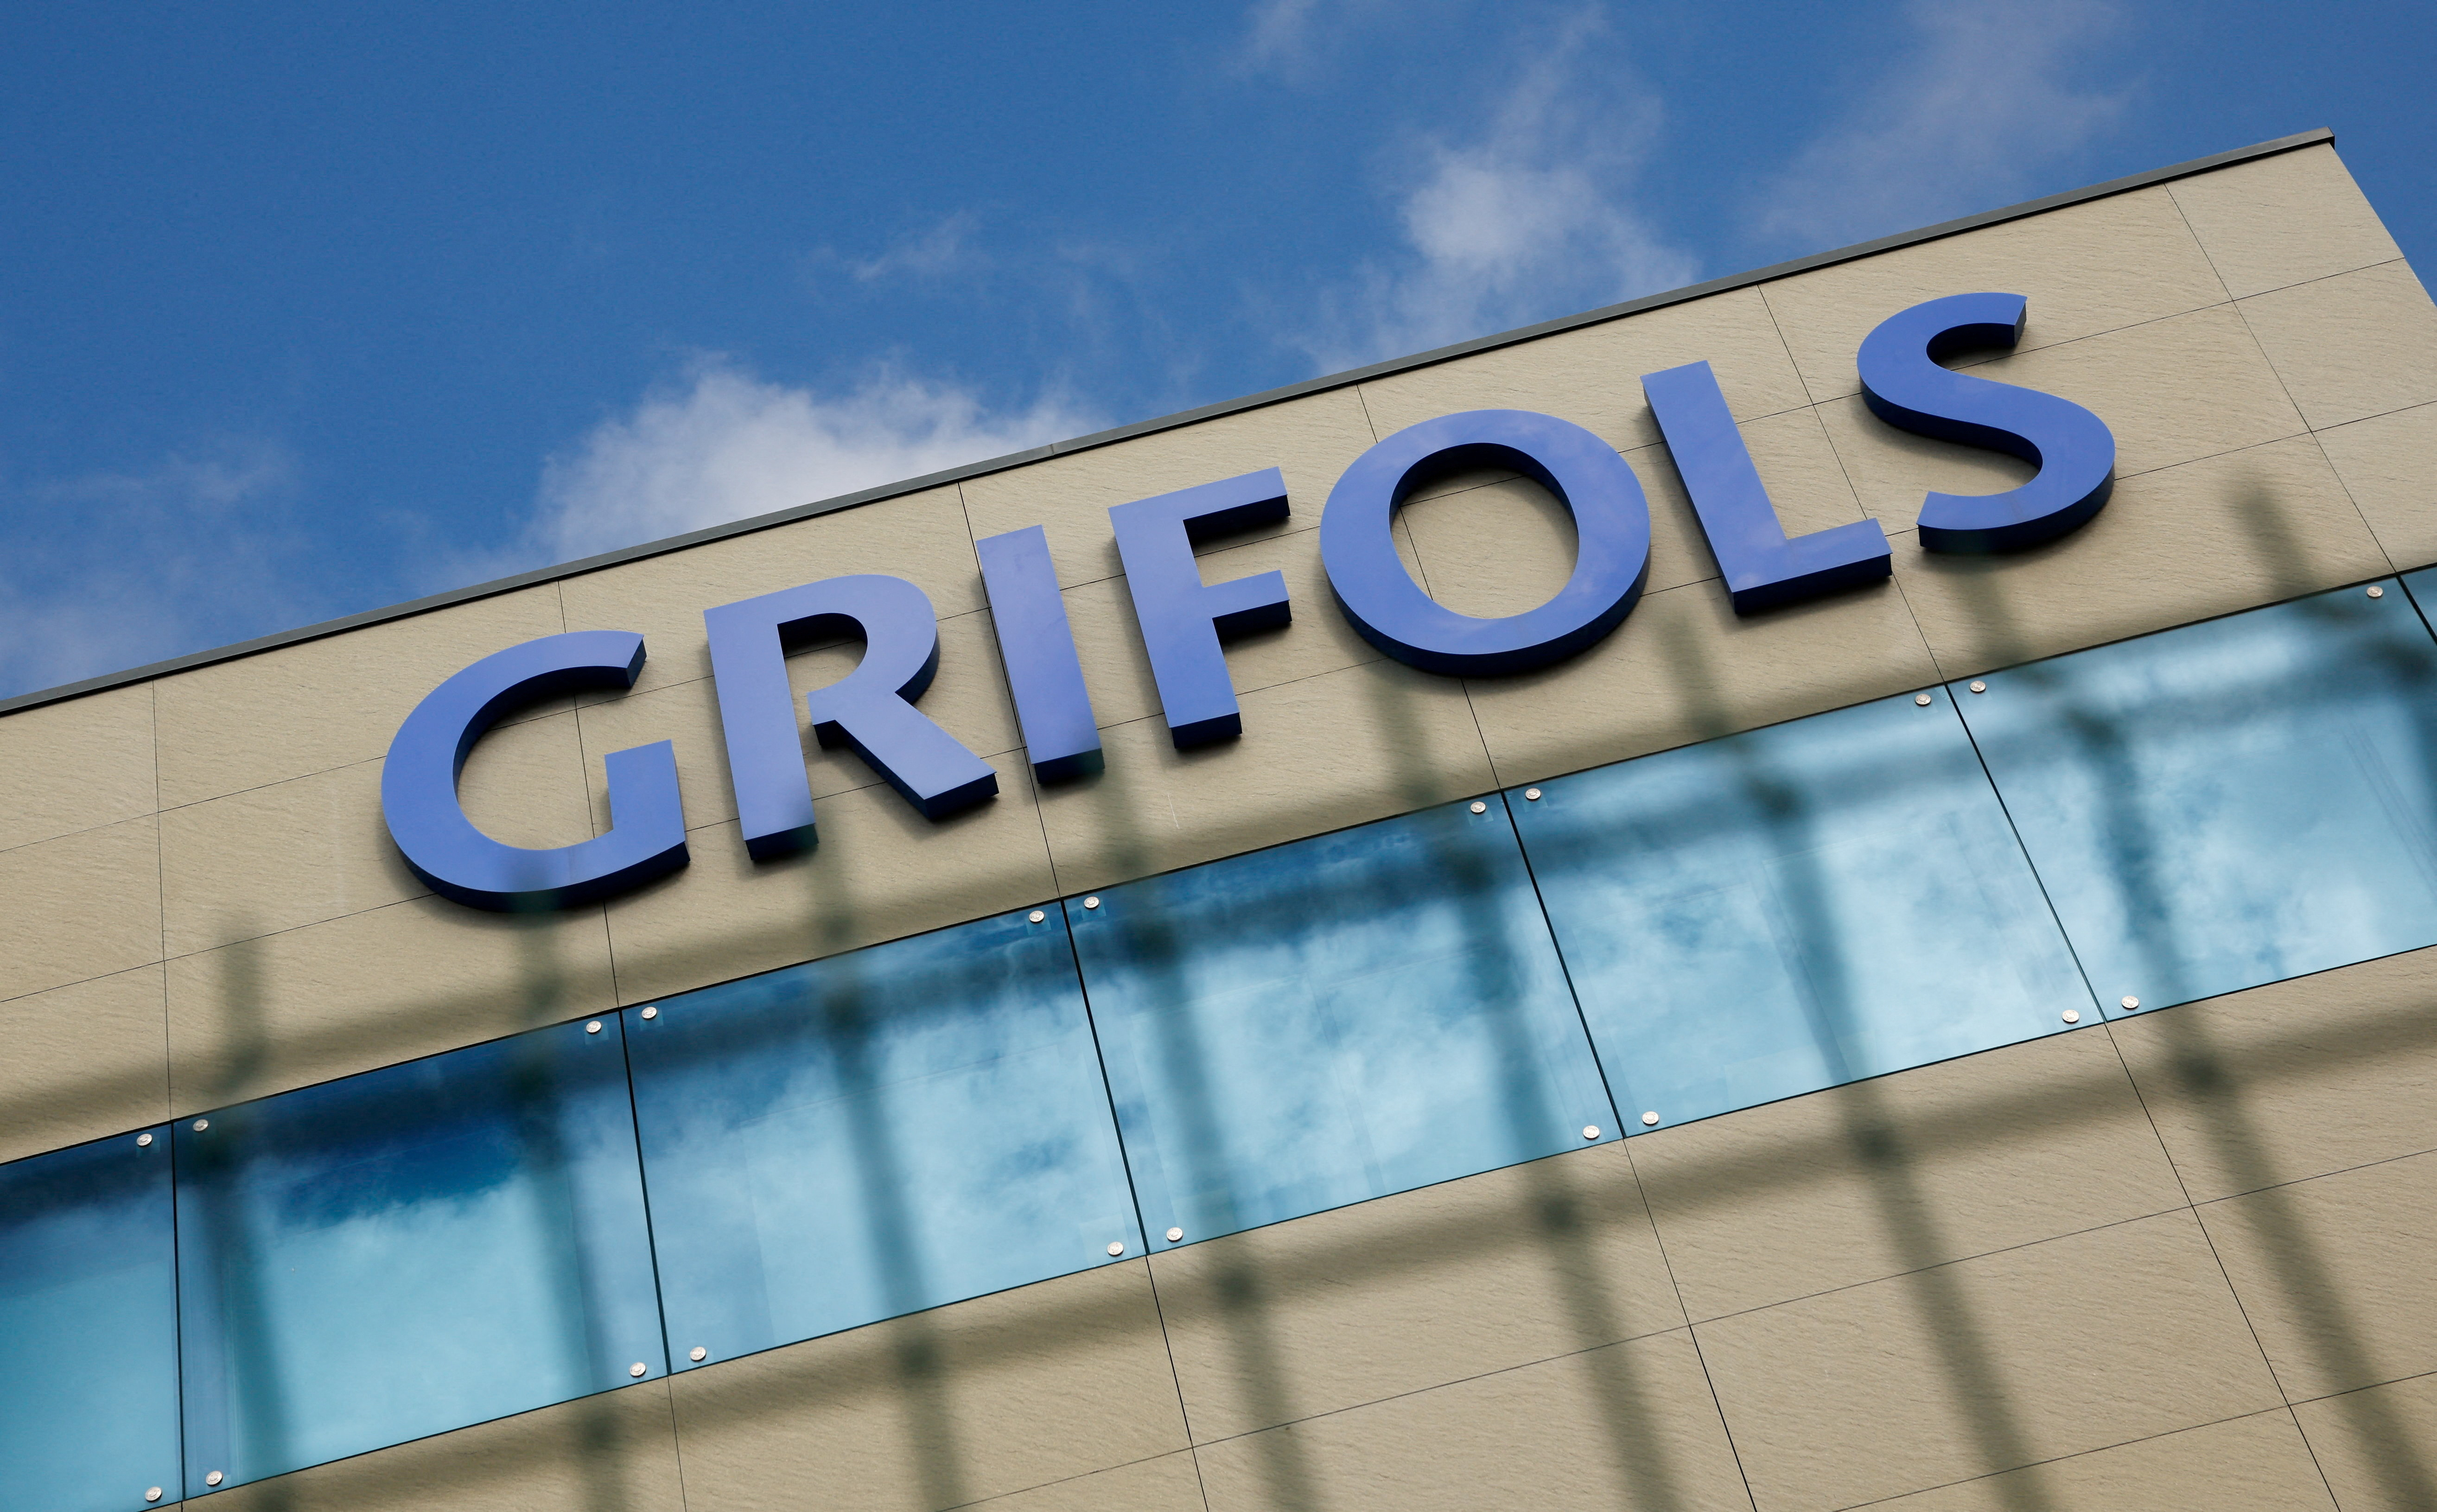 Logo of the Spanish pharmaceuticals company Grifols is pictured on their facilities in Parets del Valles